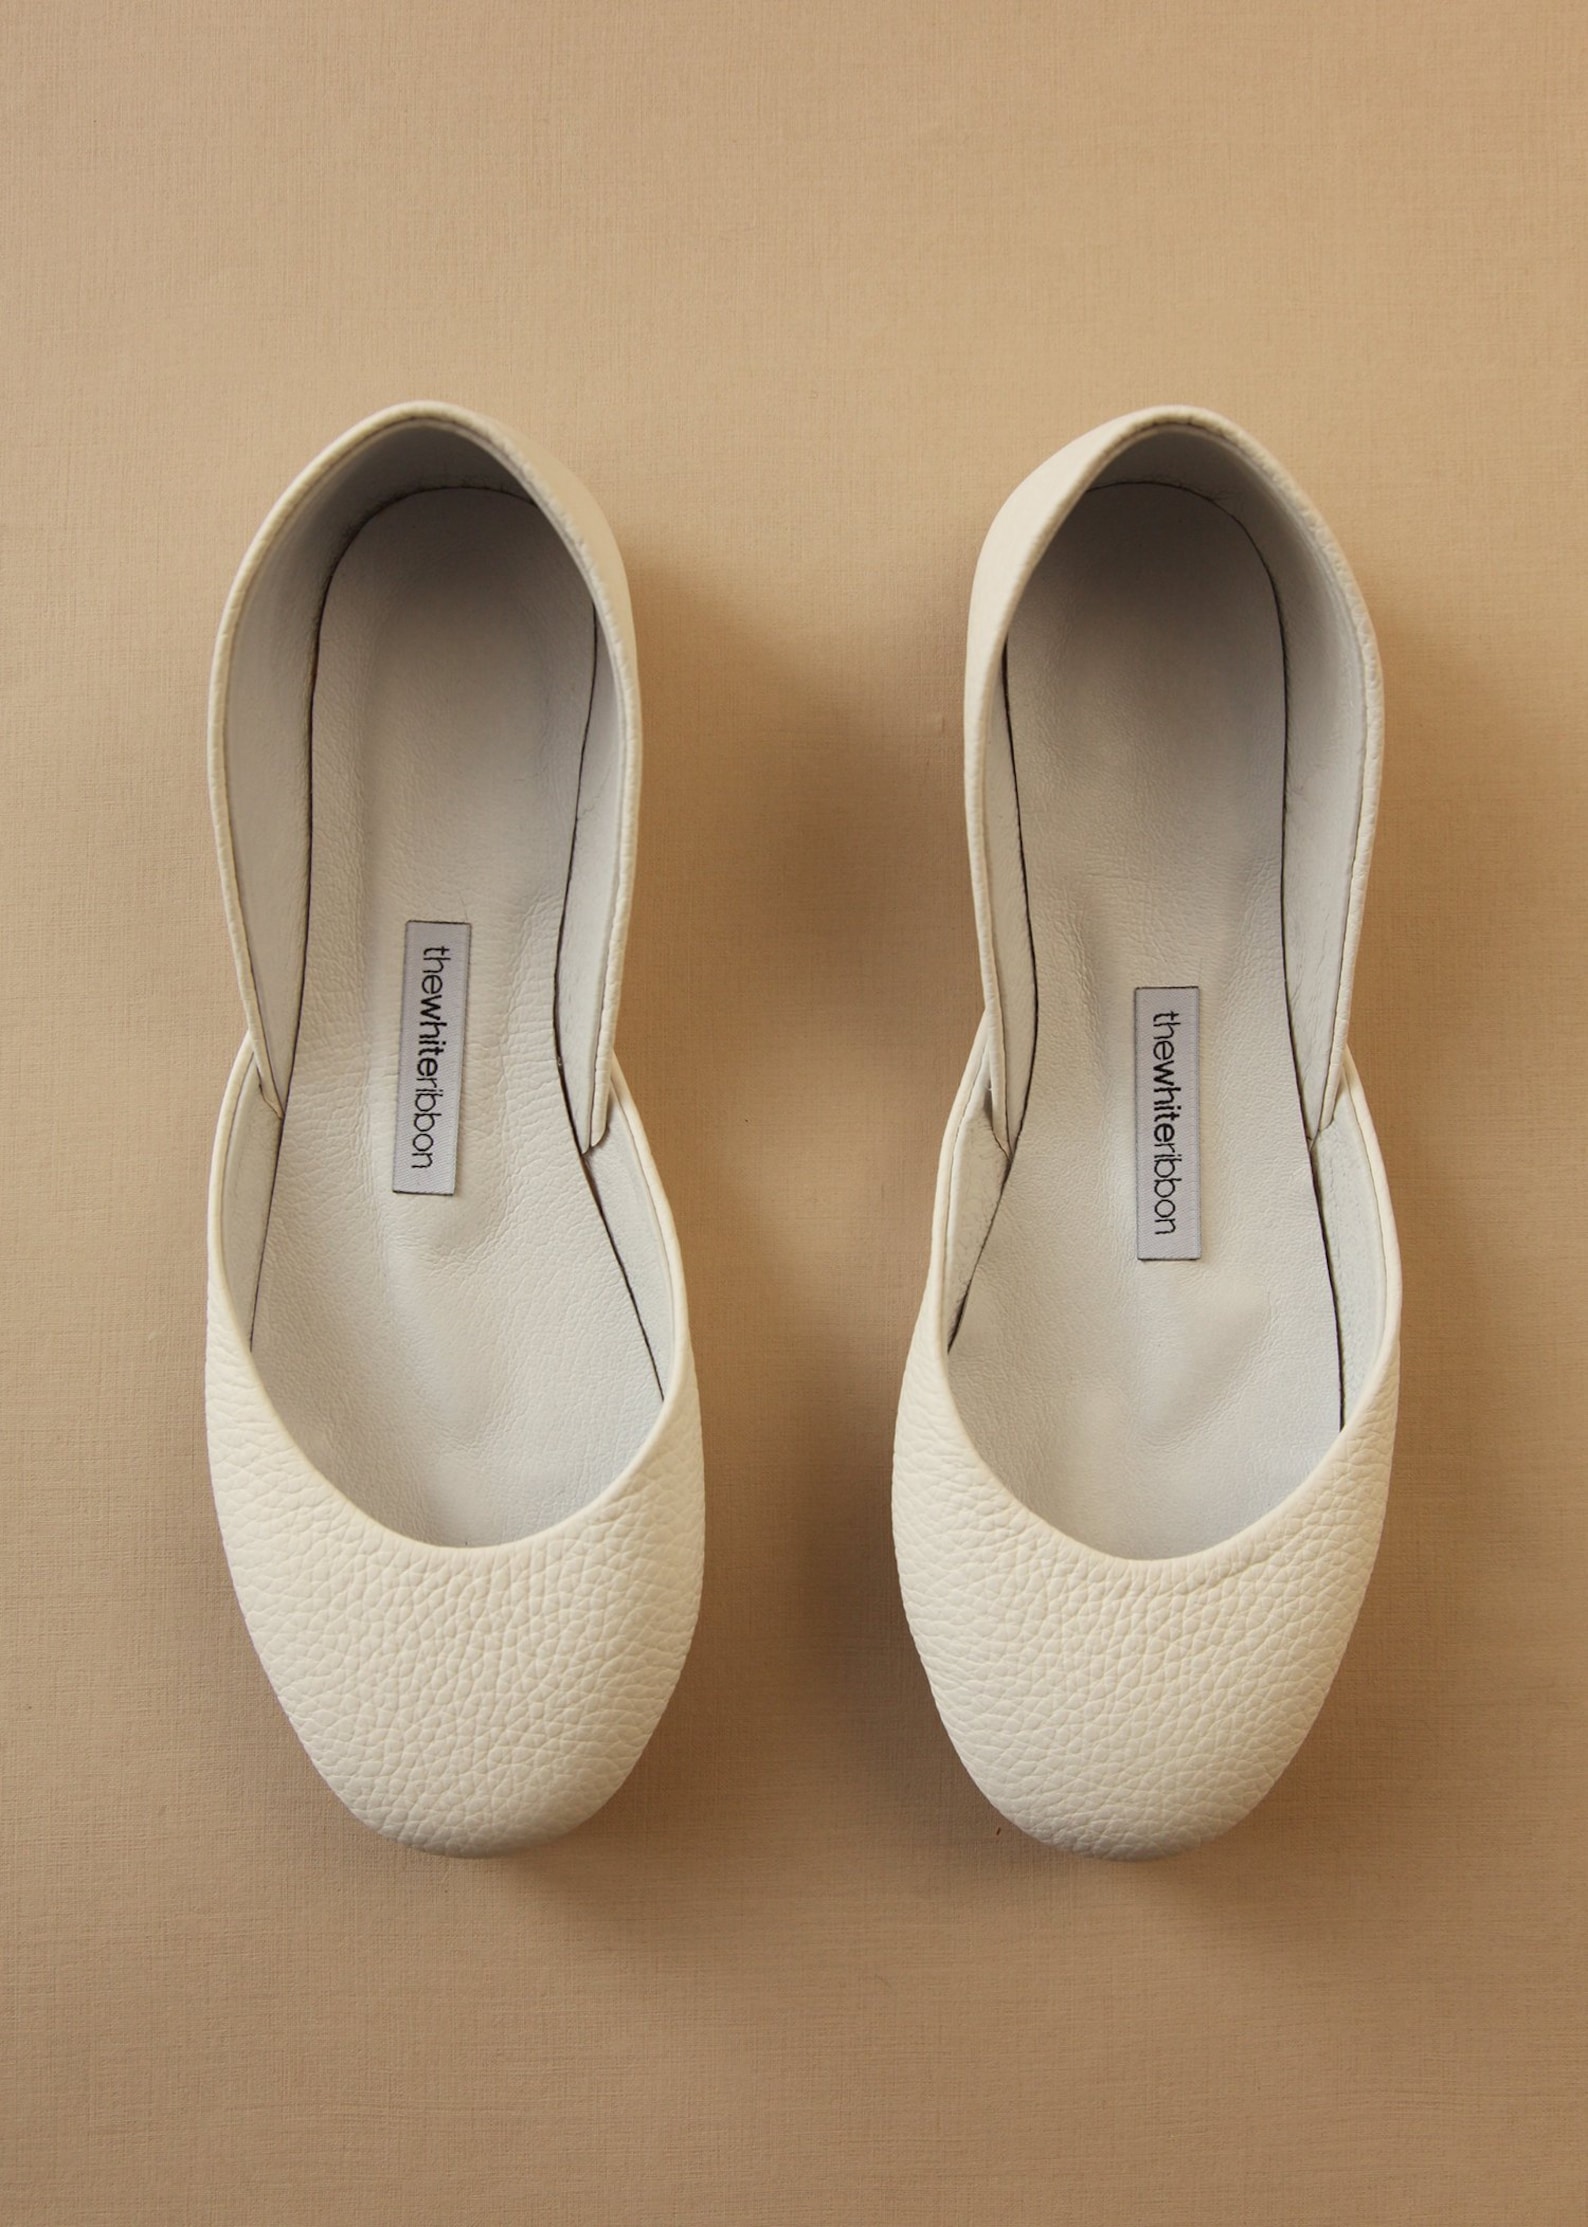 the classic ballet flats in ivory textured | pointe style shoes | standard width | ivory textured | classic cut | ready to ship